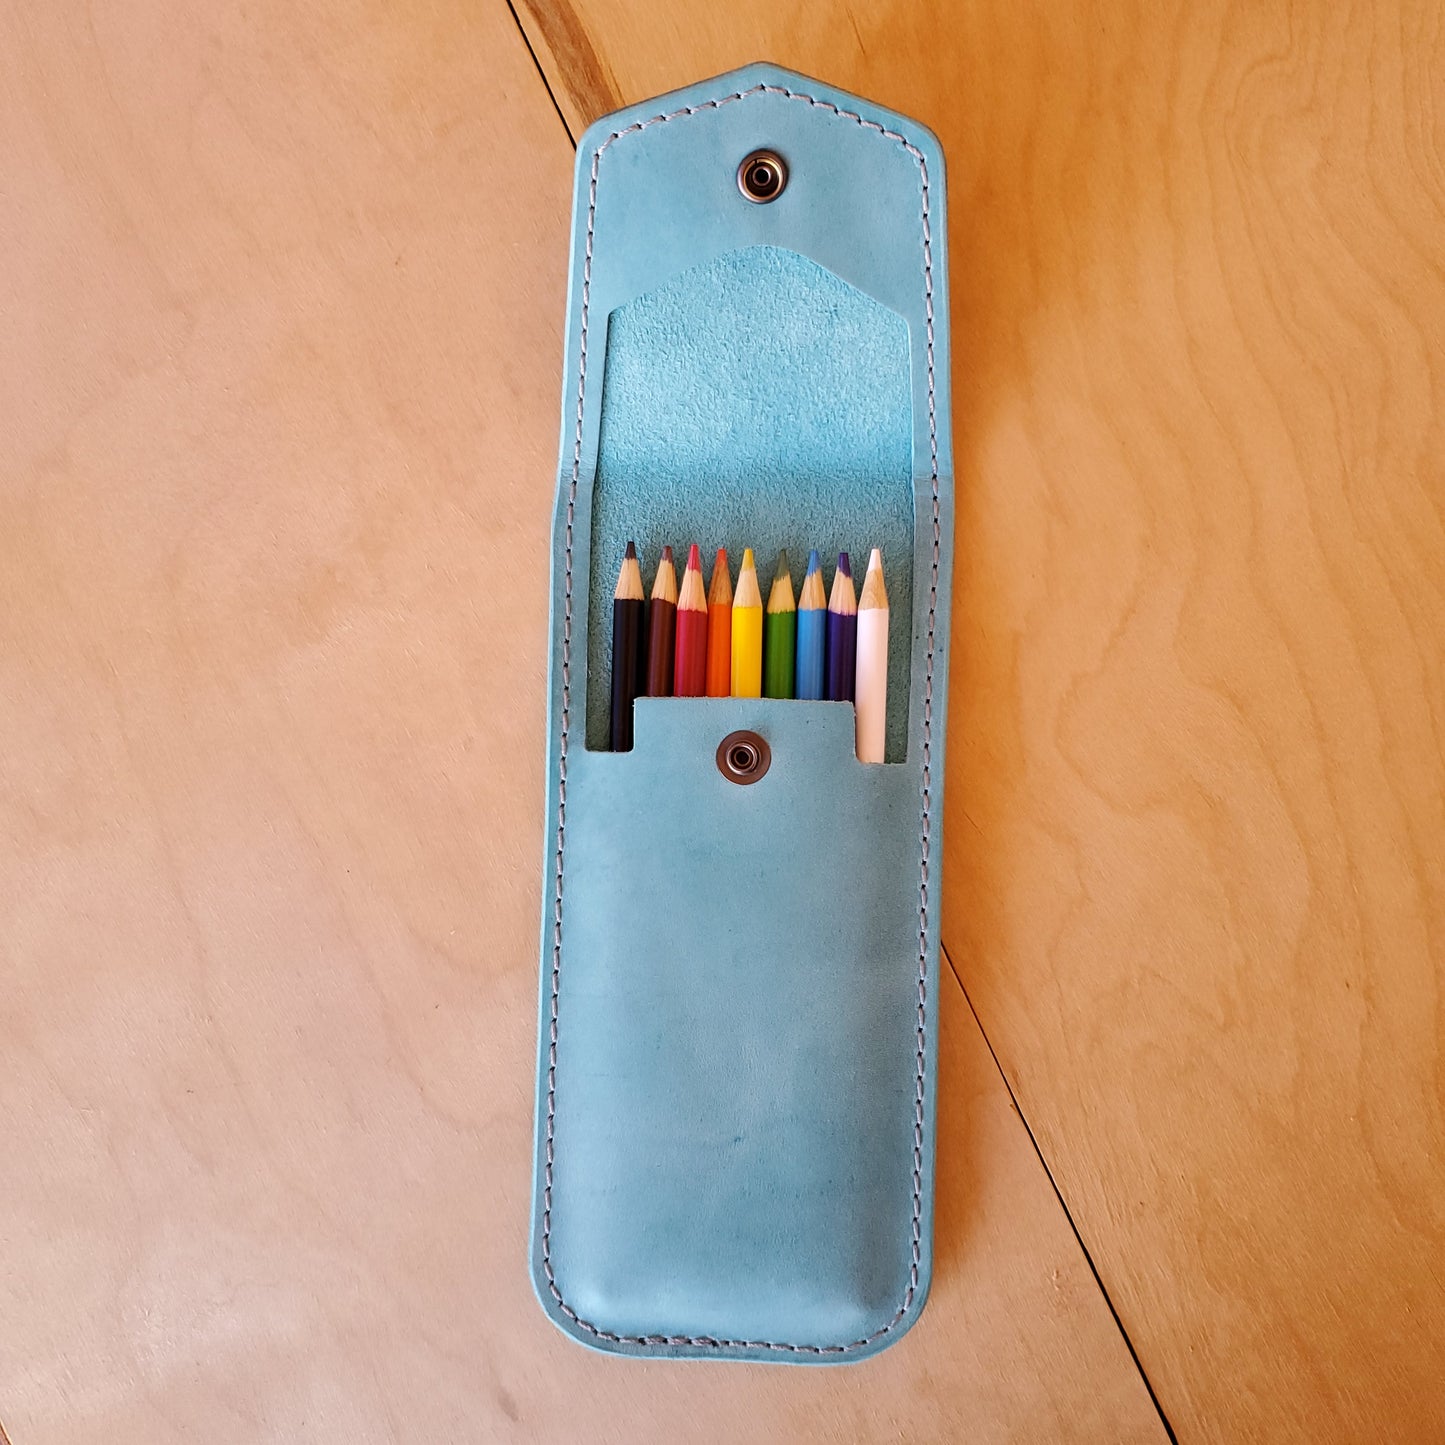 Leather Pen Pencil Case - Lazy 3 Leather Company